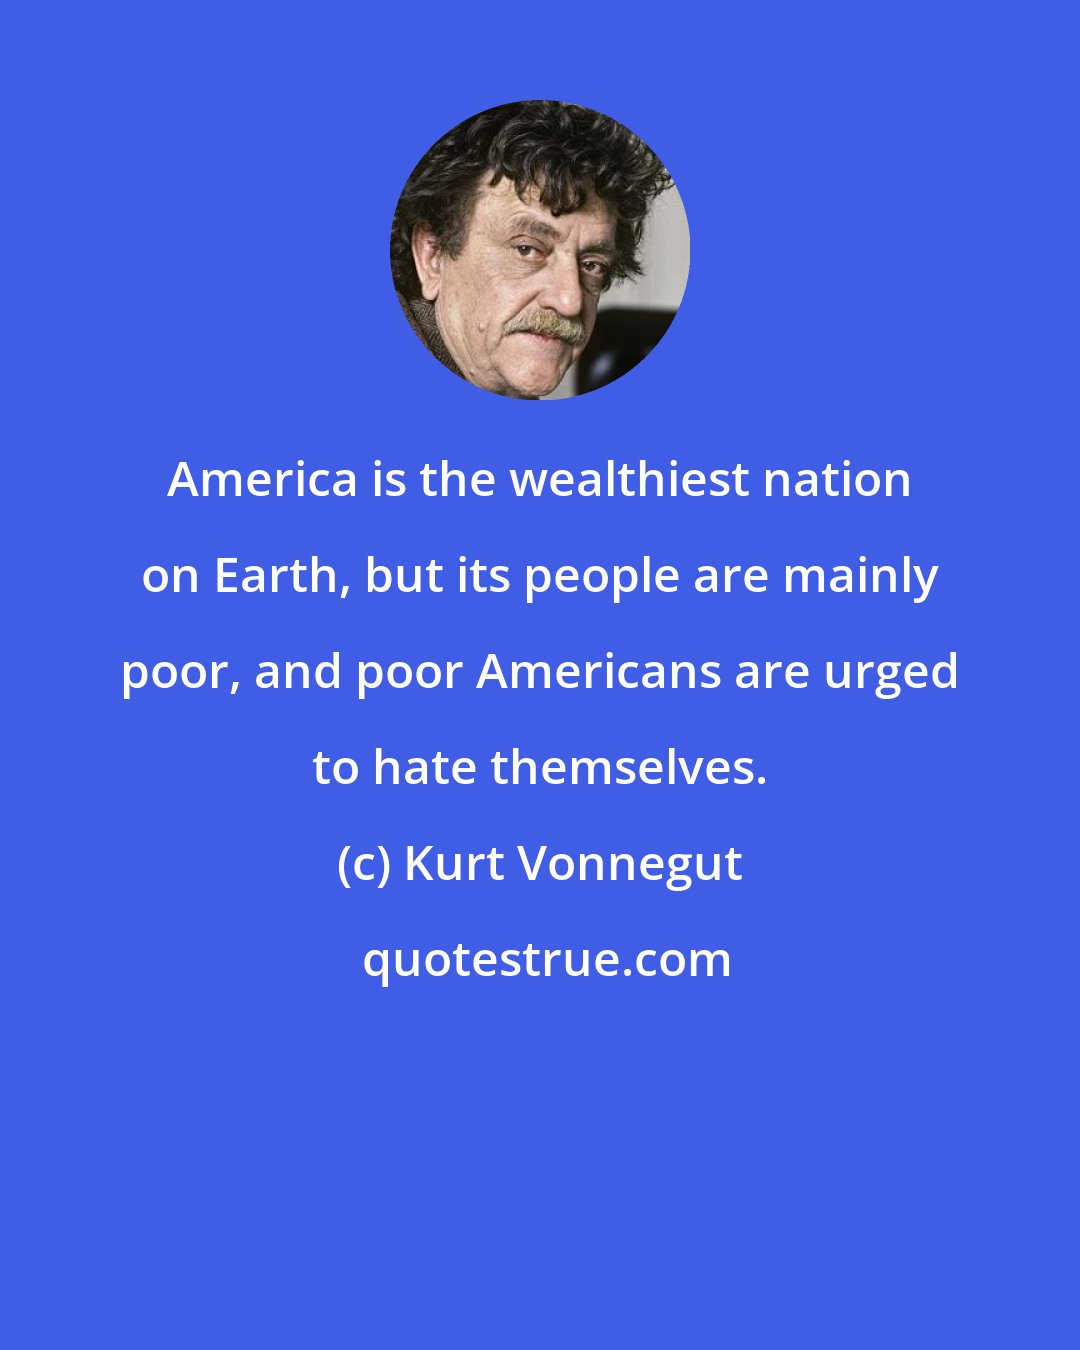 Kurt Vonnegut: America is the wealthiest nation on Earth, but its people are mainly poor, and poor Americans are urged to hate themselves.